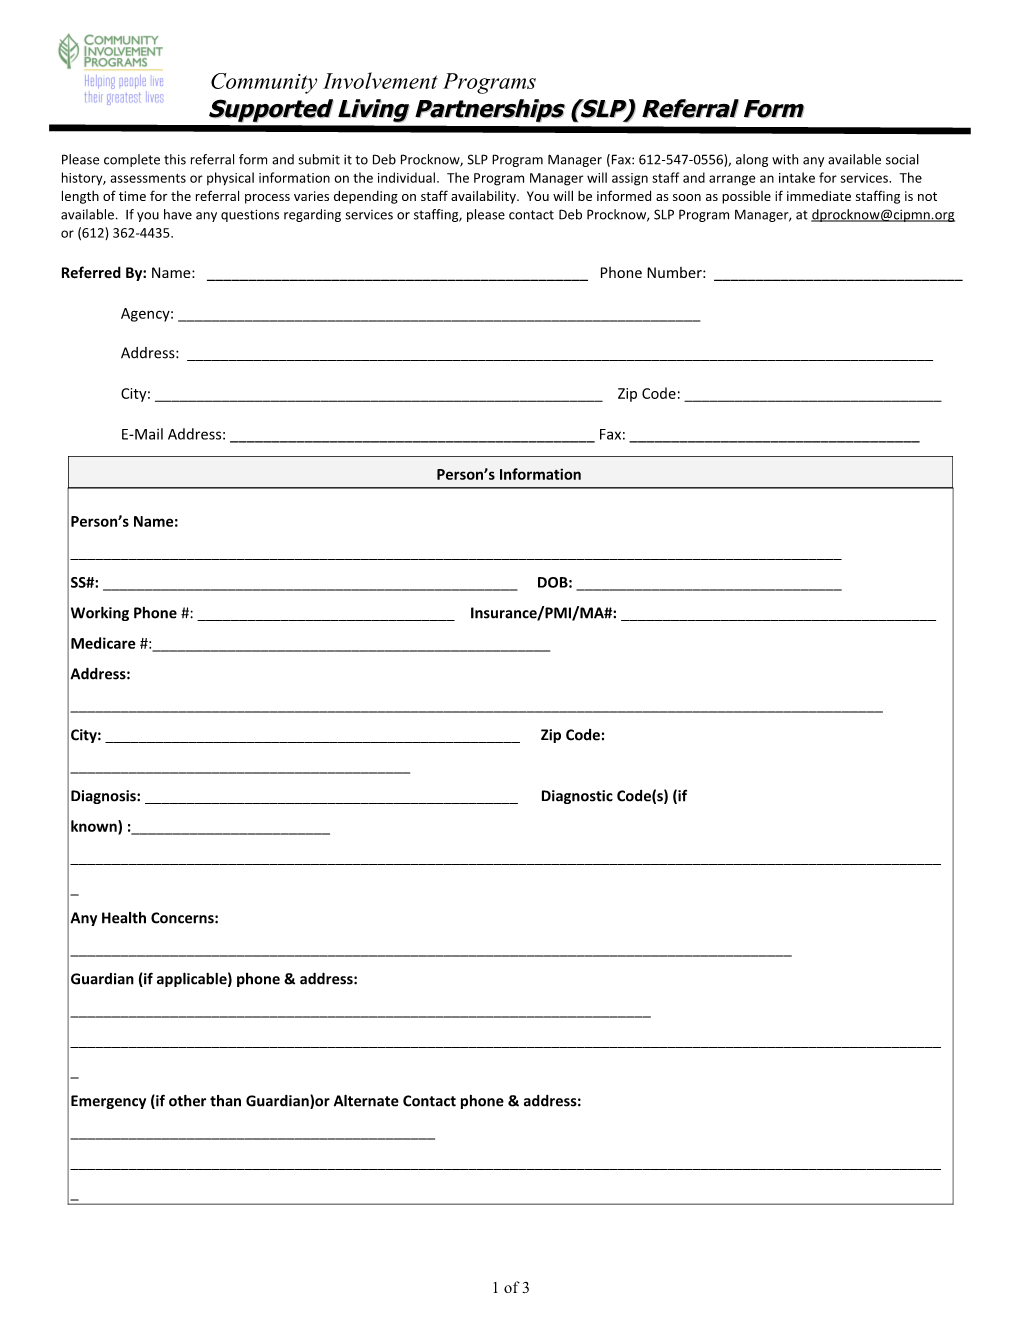 Please Complete This Referral Form and Submit It to the Intake Coordinator(S) Along With